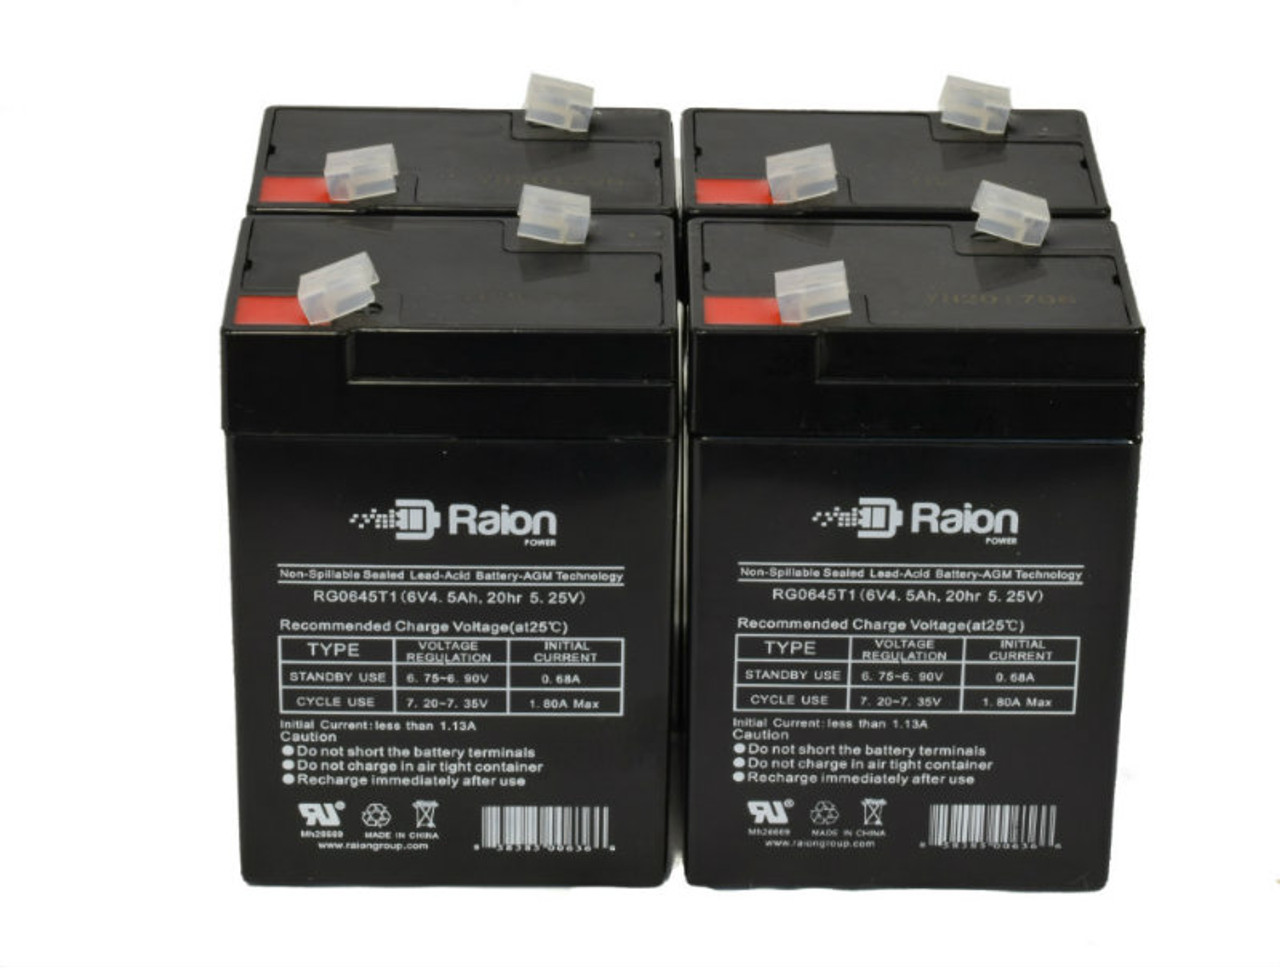 Raion Power 6V 4.5Ah Replacement Emergency Light Battery for Lithonia ELM Series - 4 Pack